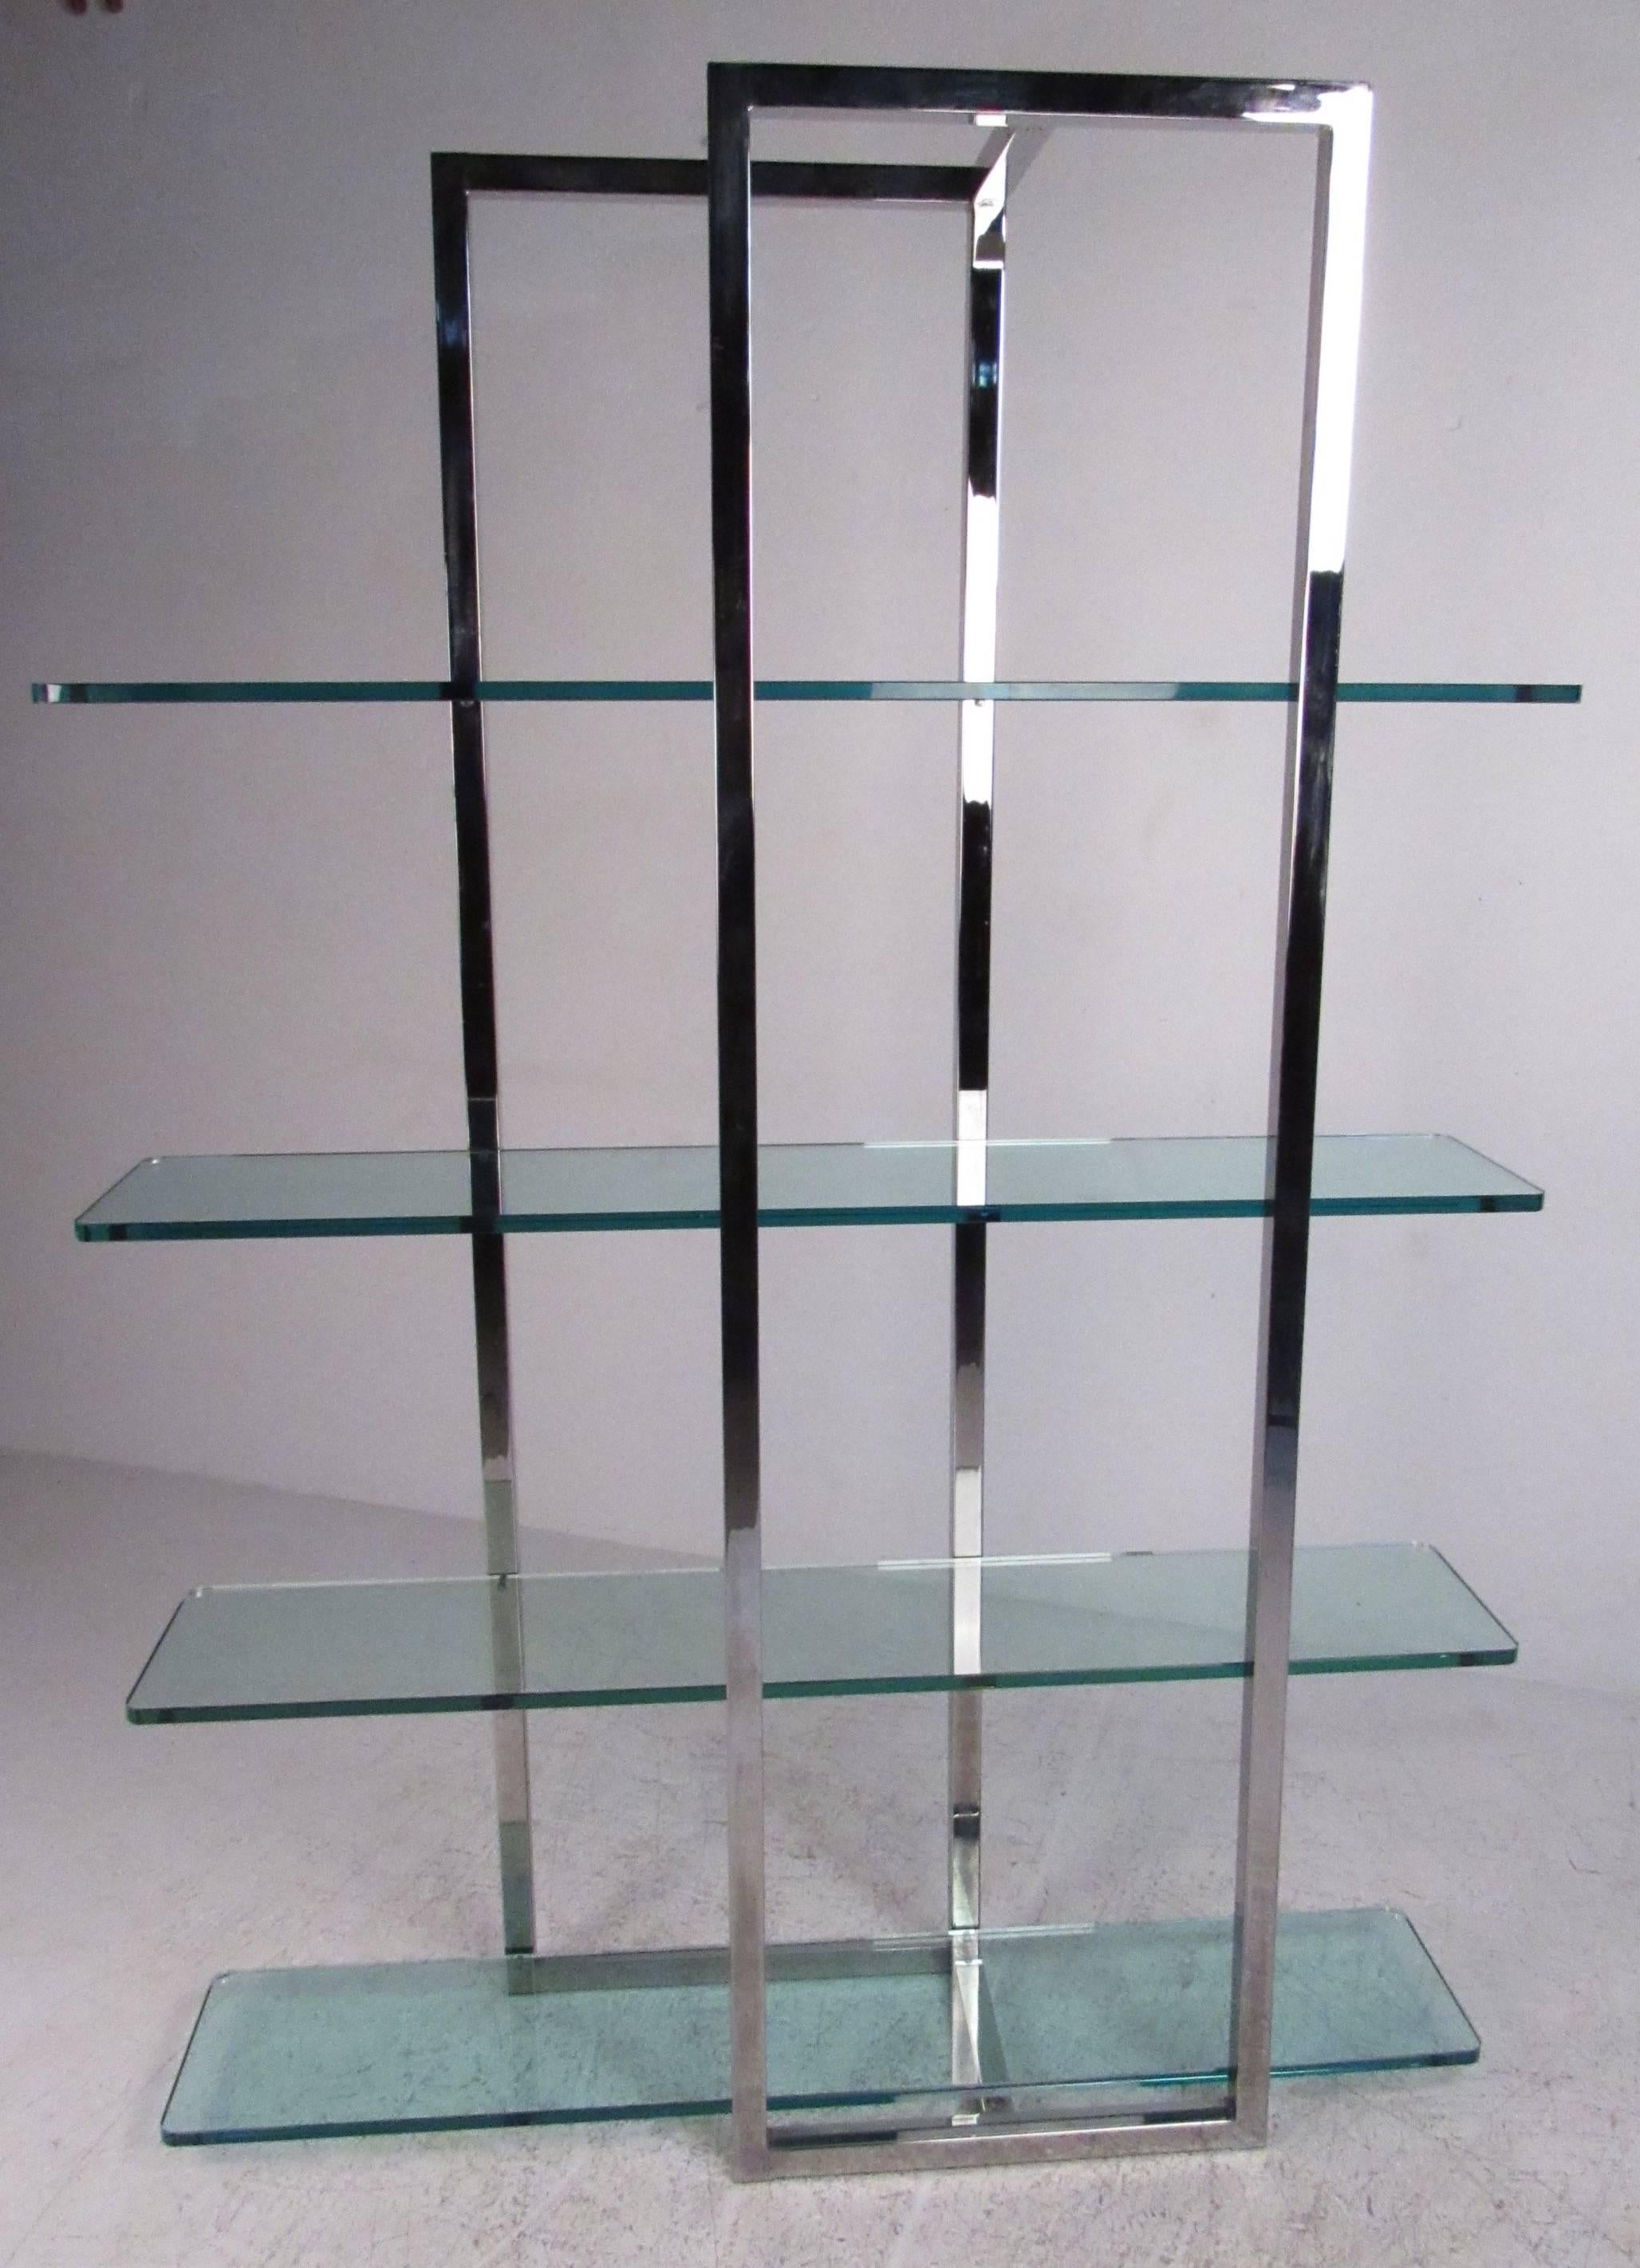 Heavy duty square-tube chrome frame with 3/4" thick glass shelves creates an impressive contemporary display unit for home or office. Item preview and pickup: 1315 Hwy. 34, Wall Township, NJ, 07727.